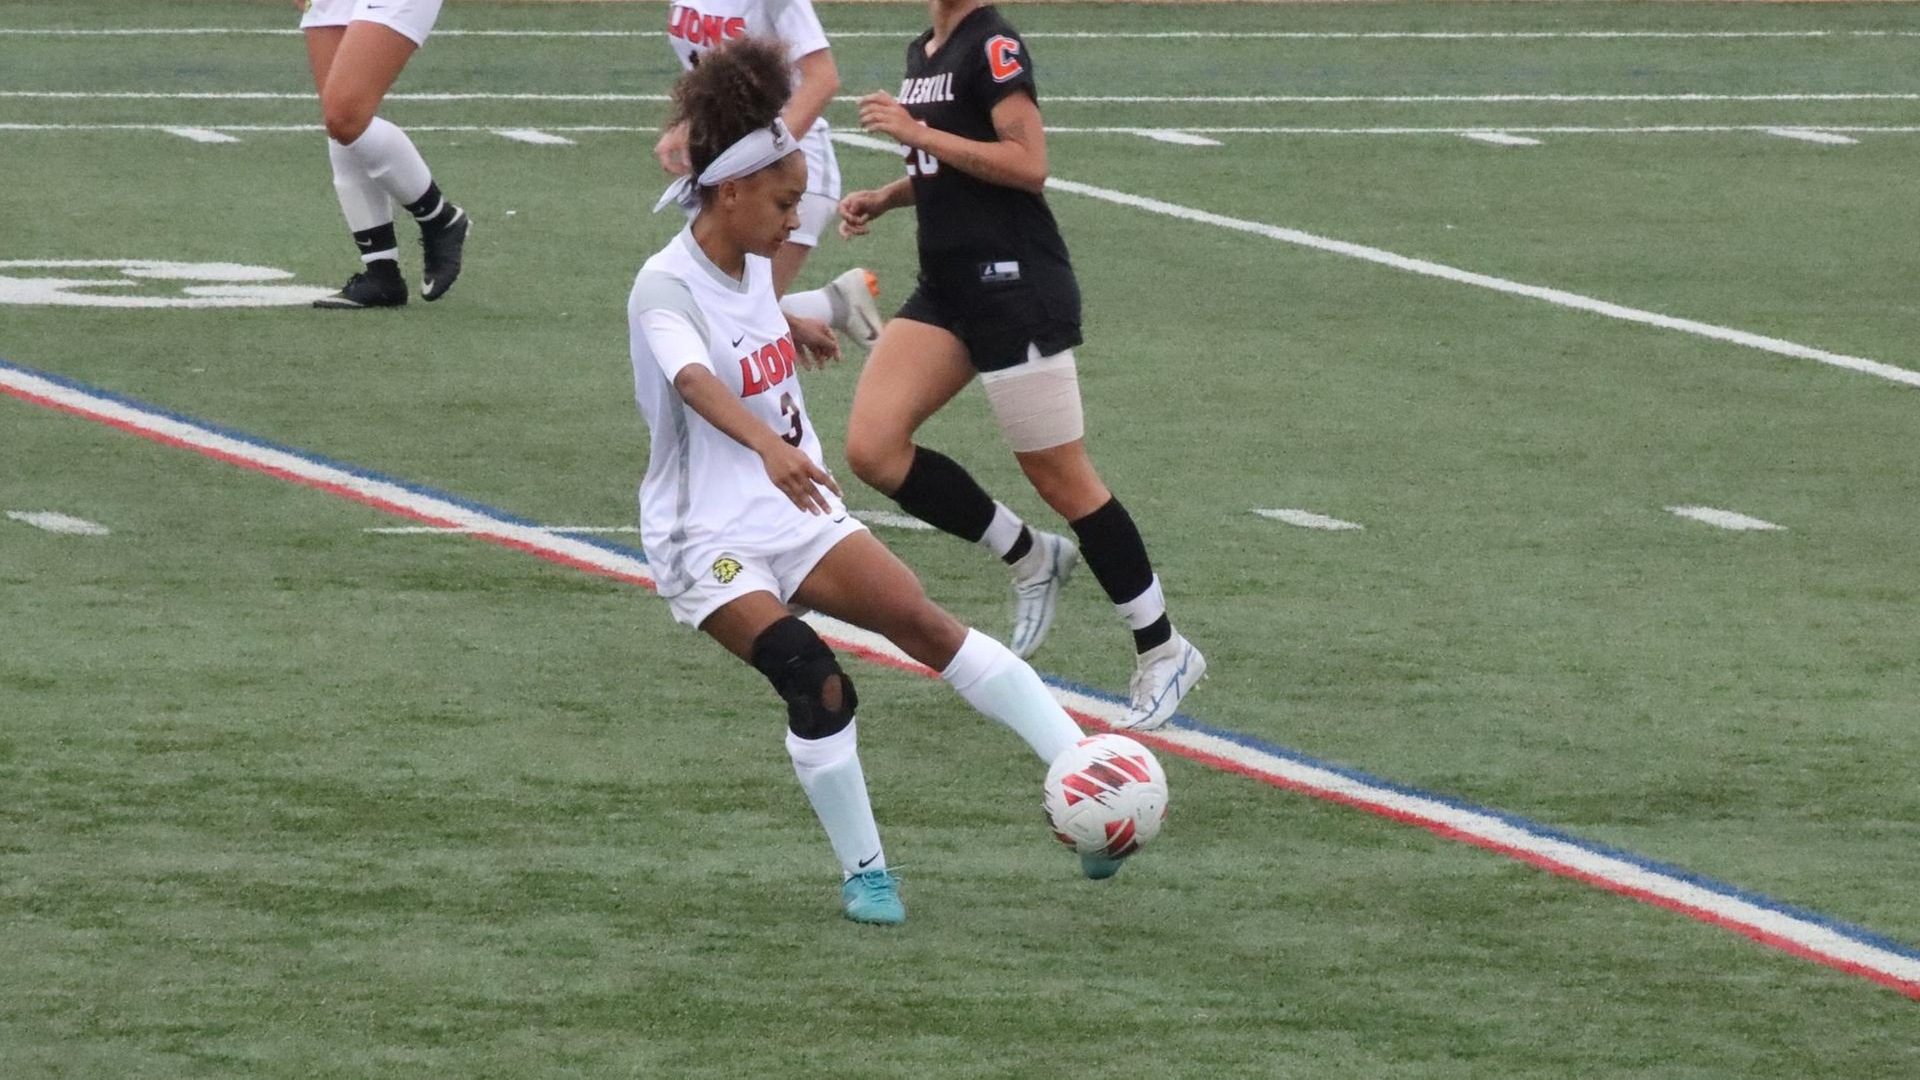 Women’s Soccer Concludes Season with 4-0 Loss at Morrisville